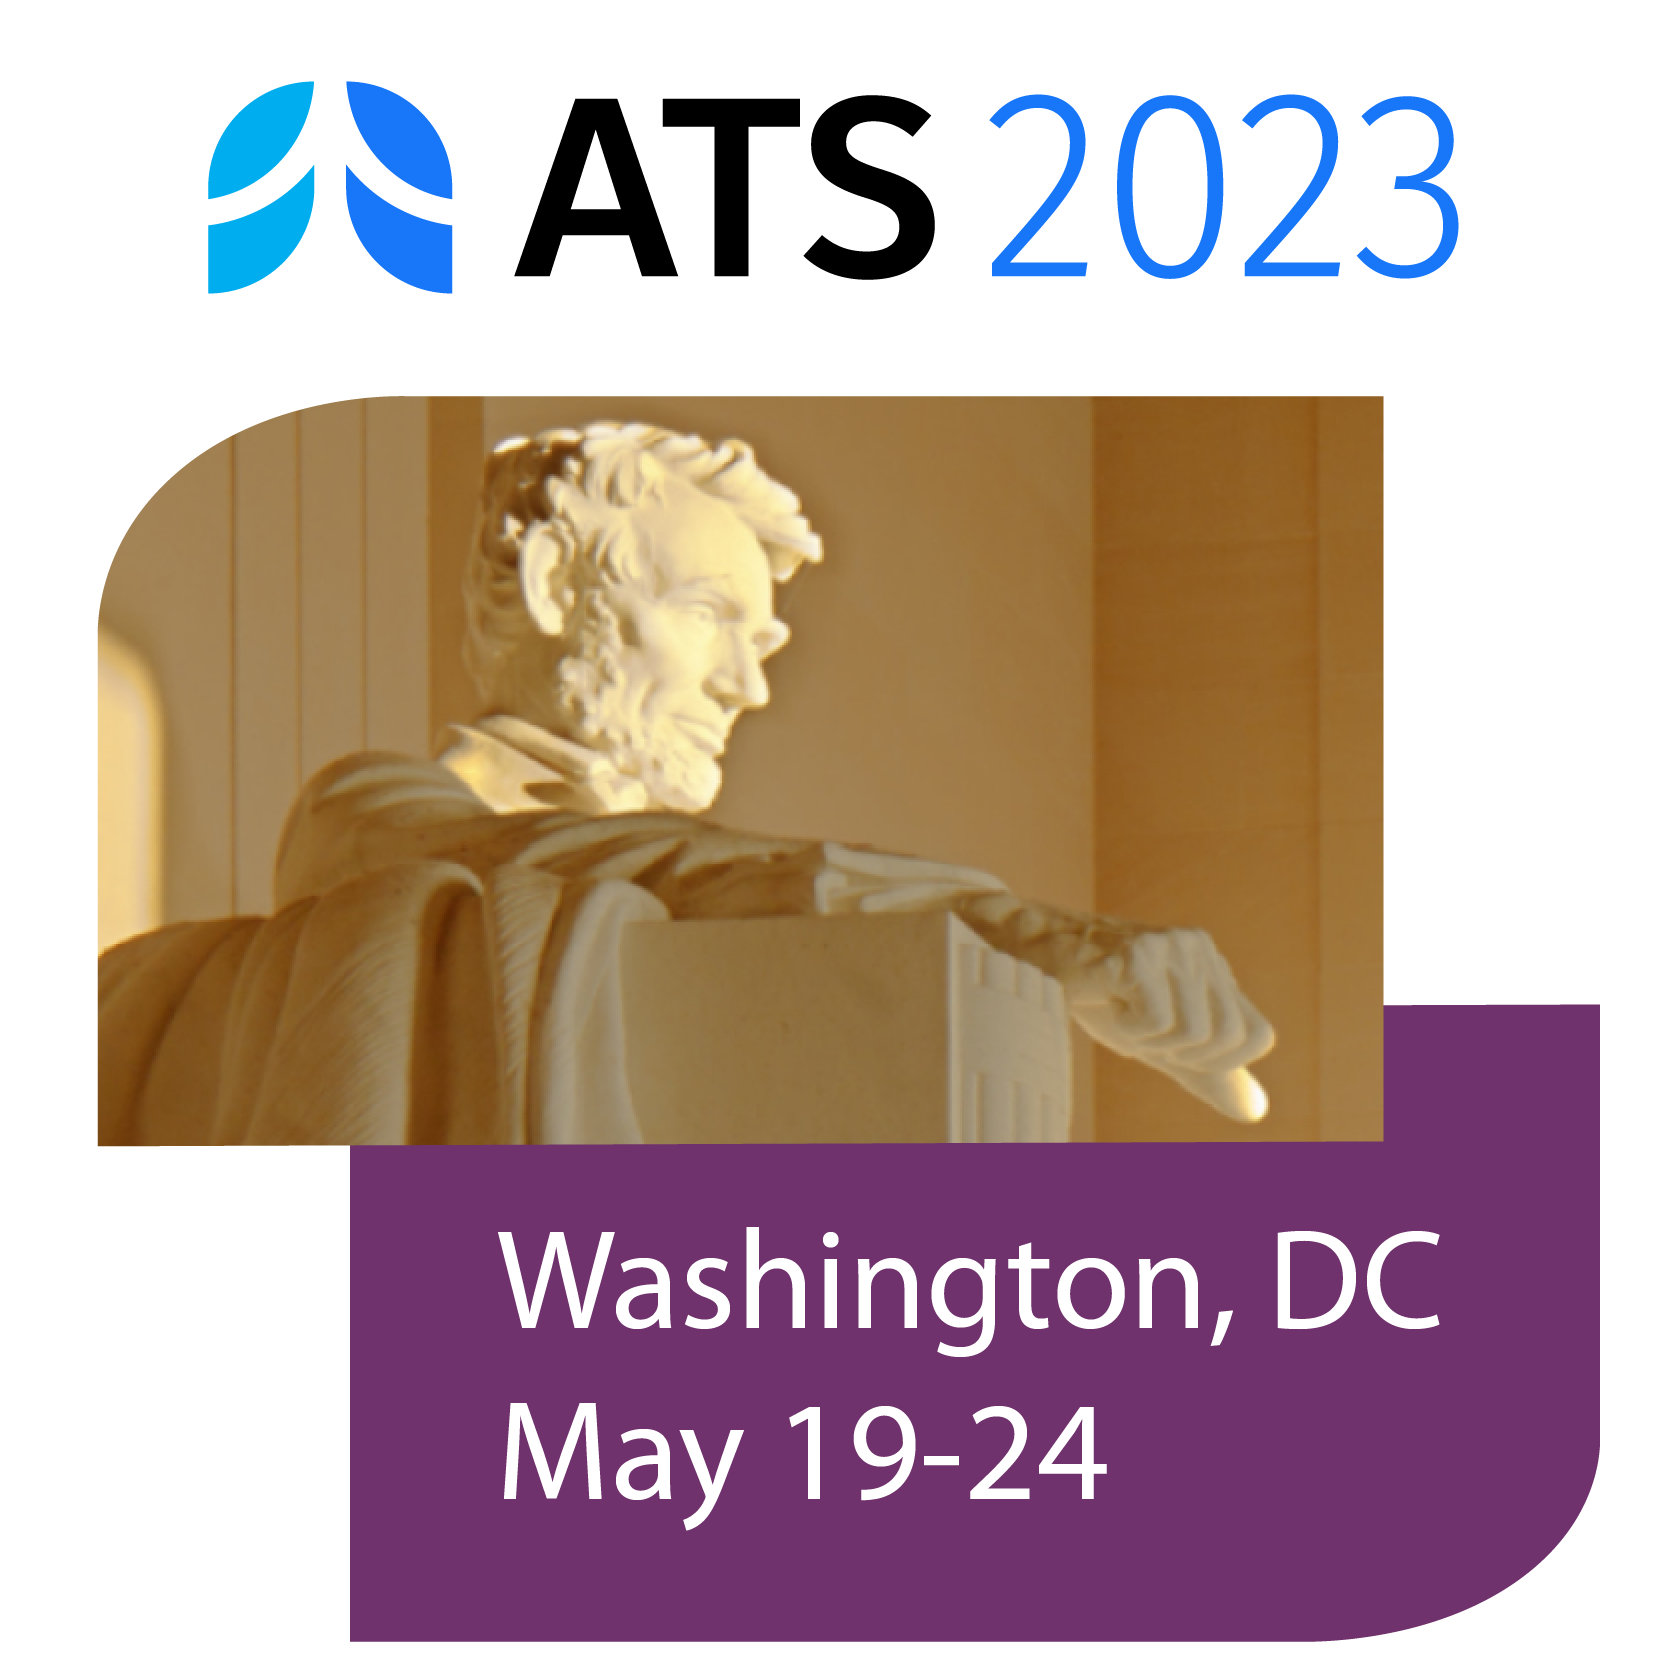 Medflixs The American Thoracic Society International Conference ATS